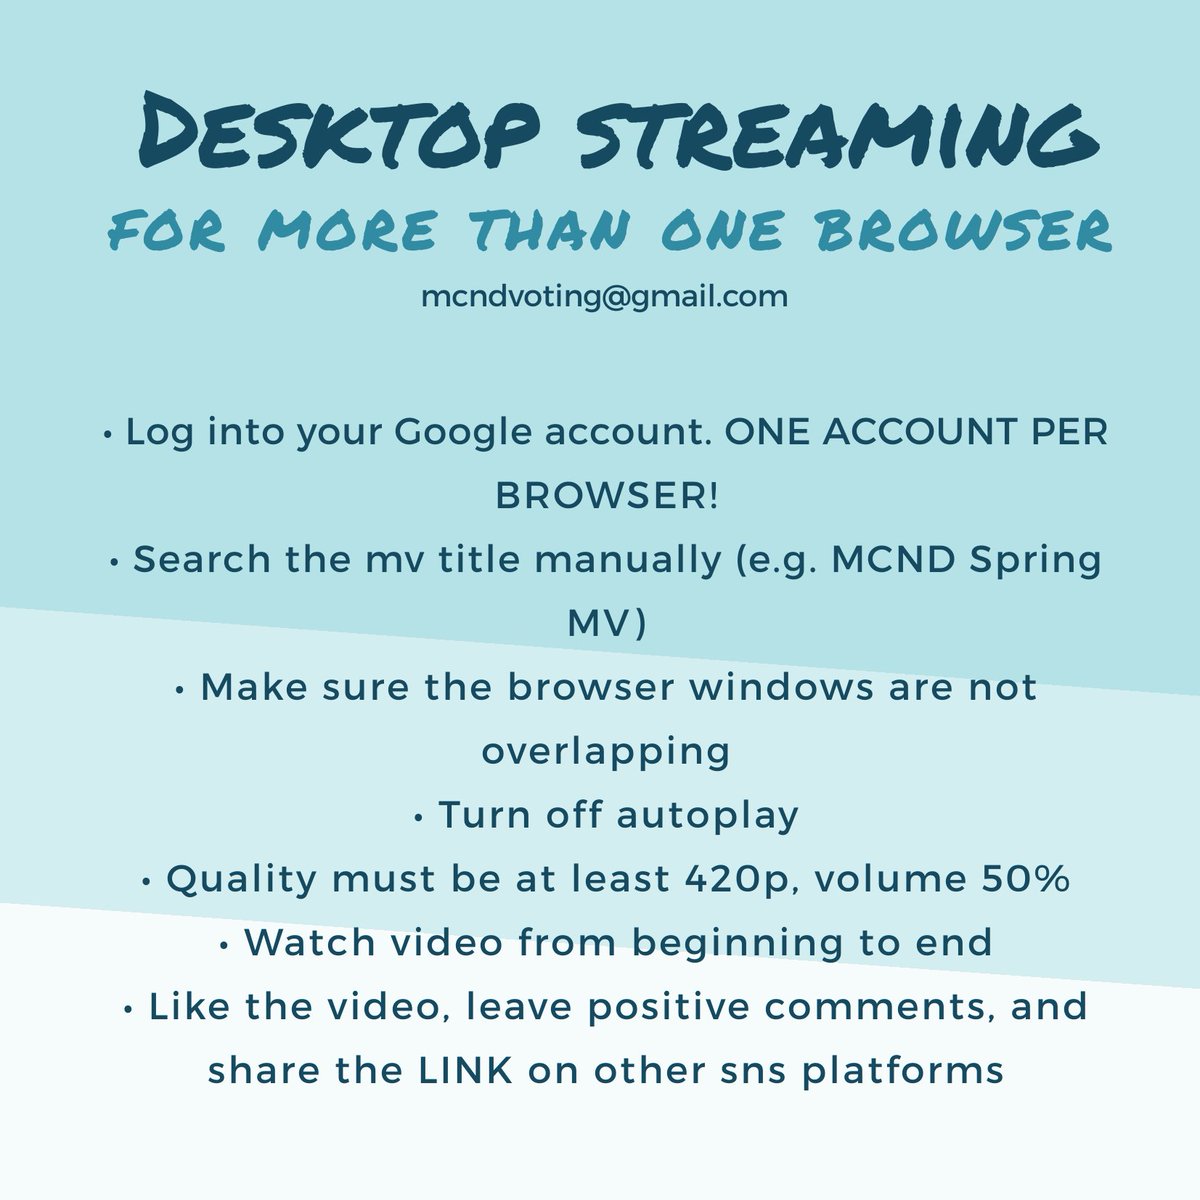 Desktop Streaming ˊˎ-Please read the guideline carefully to make sure your views will count!